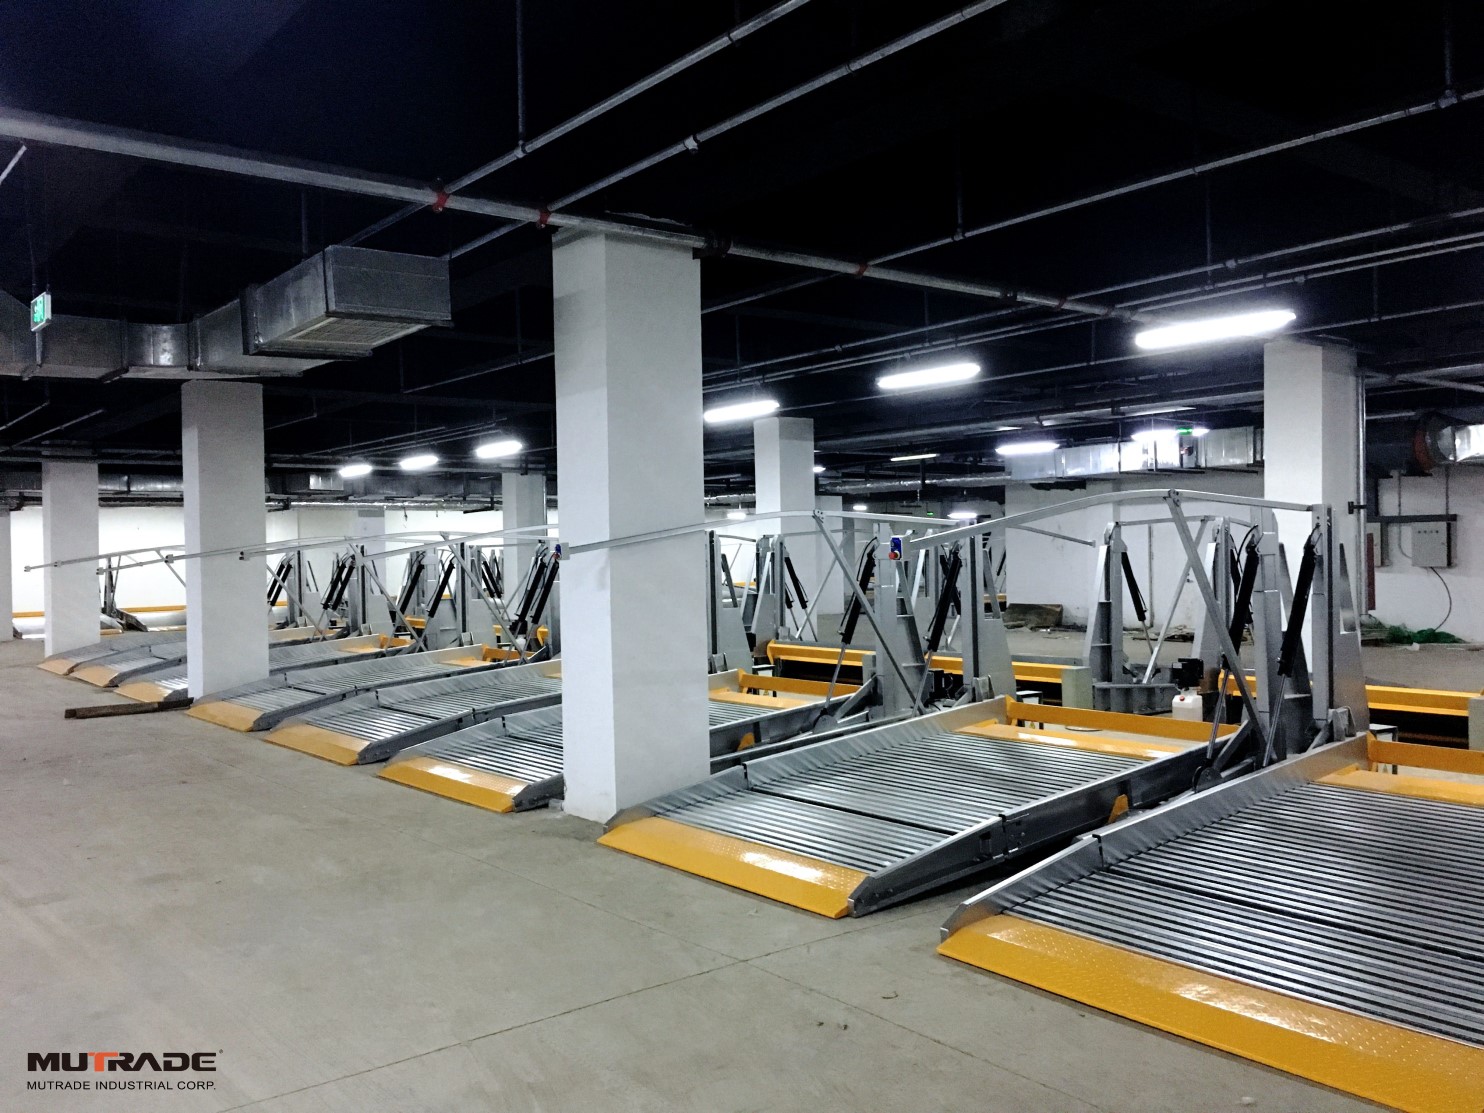 MAXIMIZING LOW CEILING PARKING EFFICIENCY WITH TPTP-2 TILTING PARKING LIFT